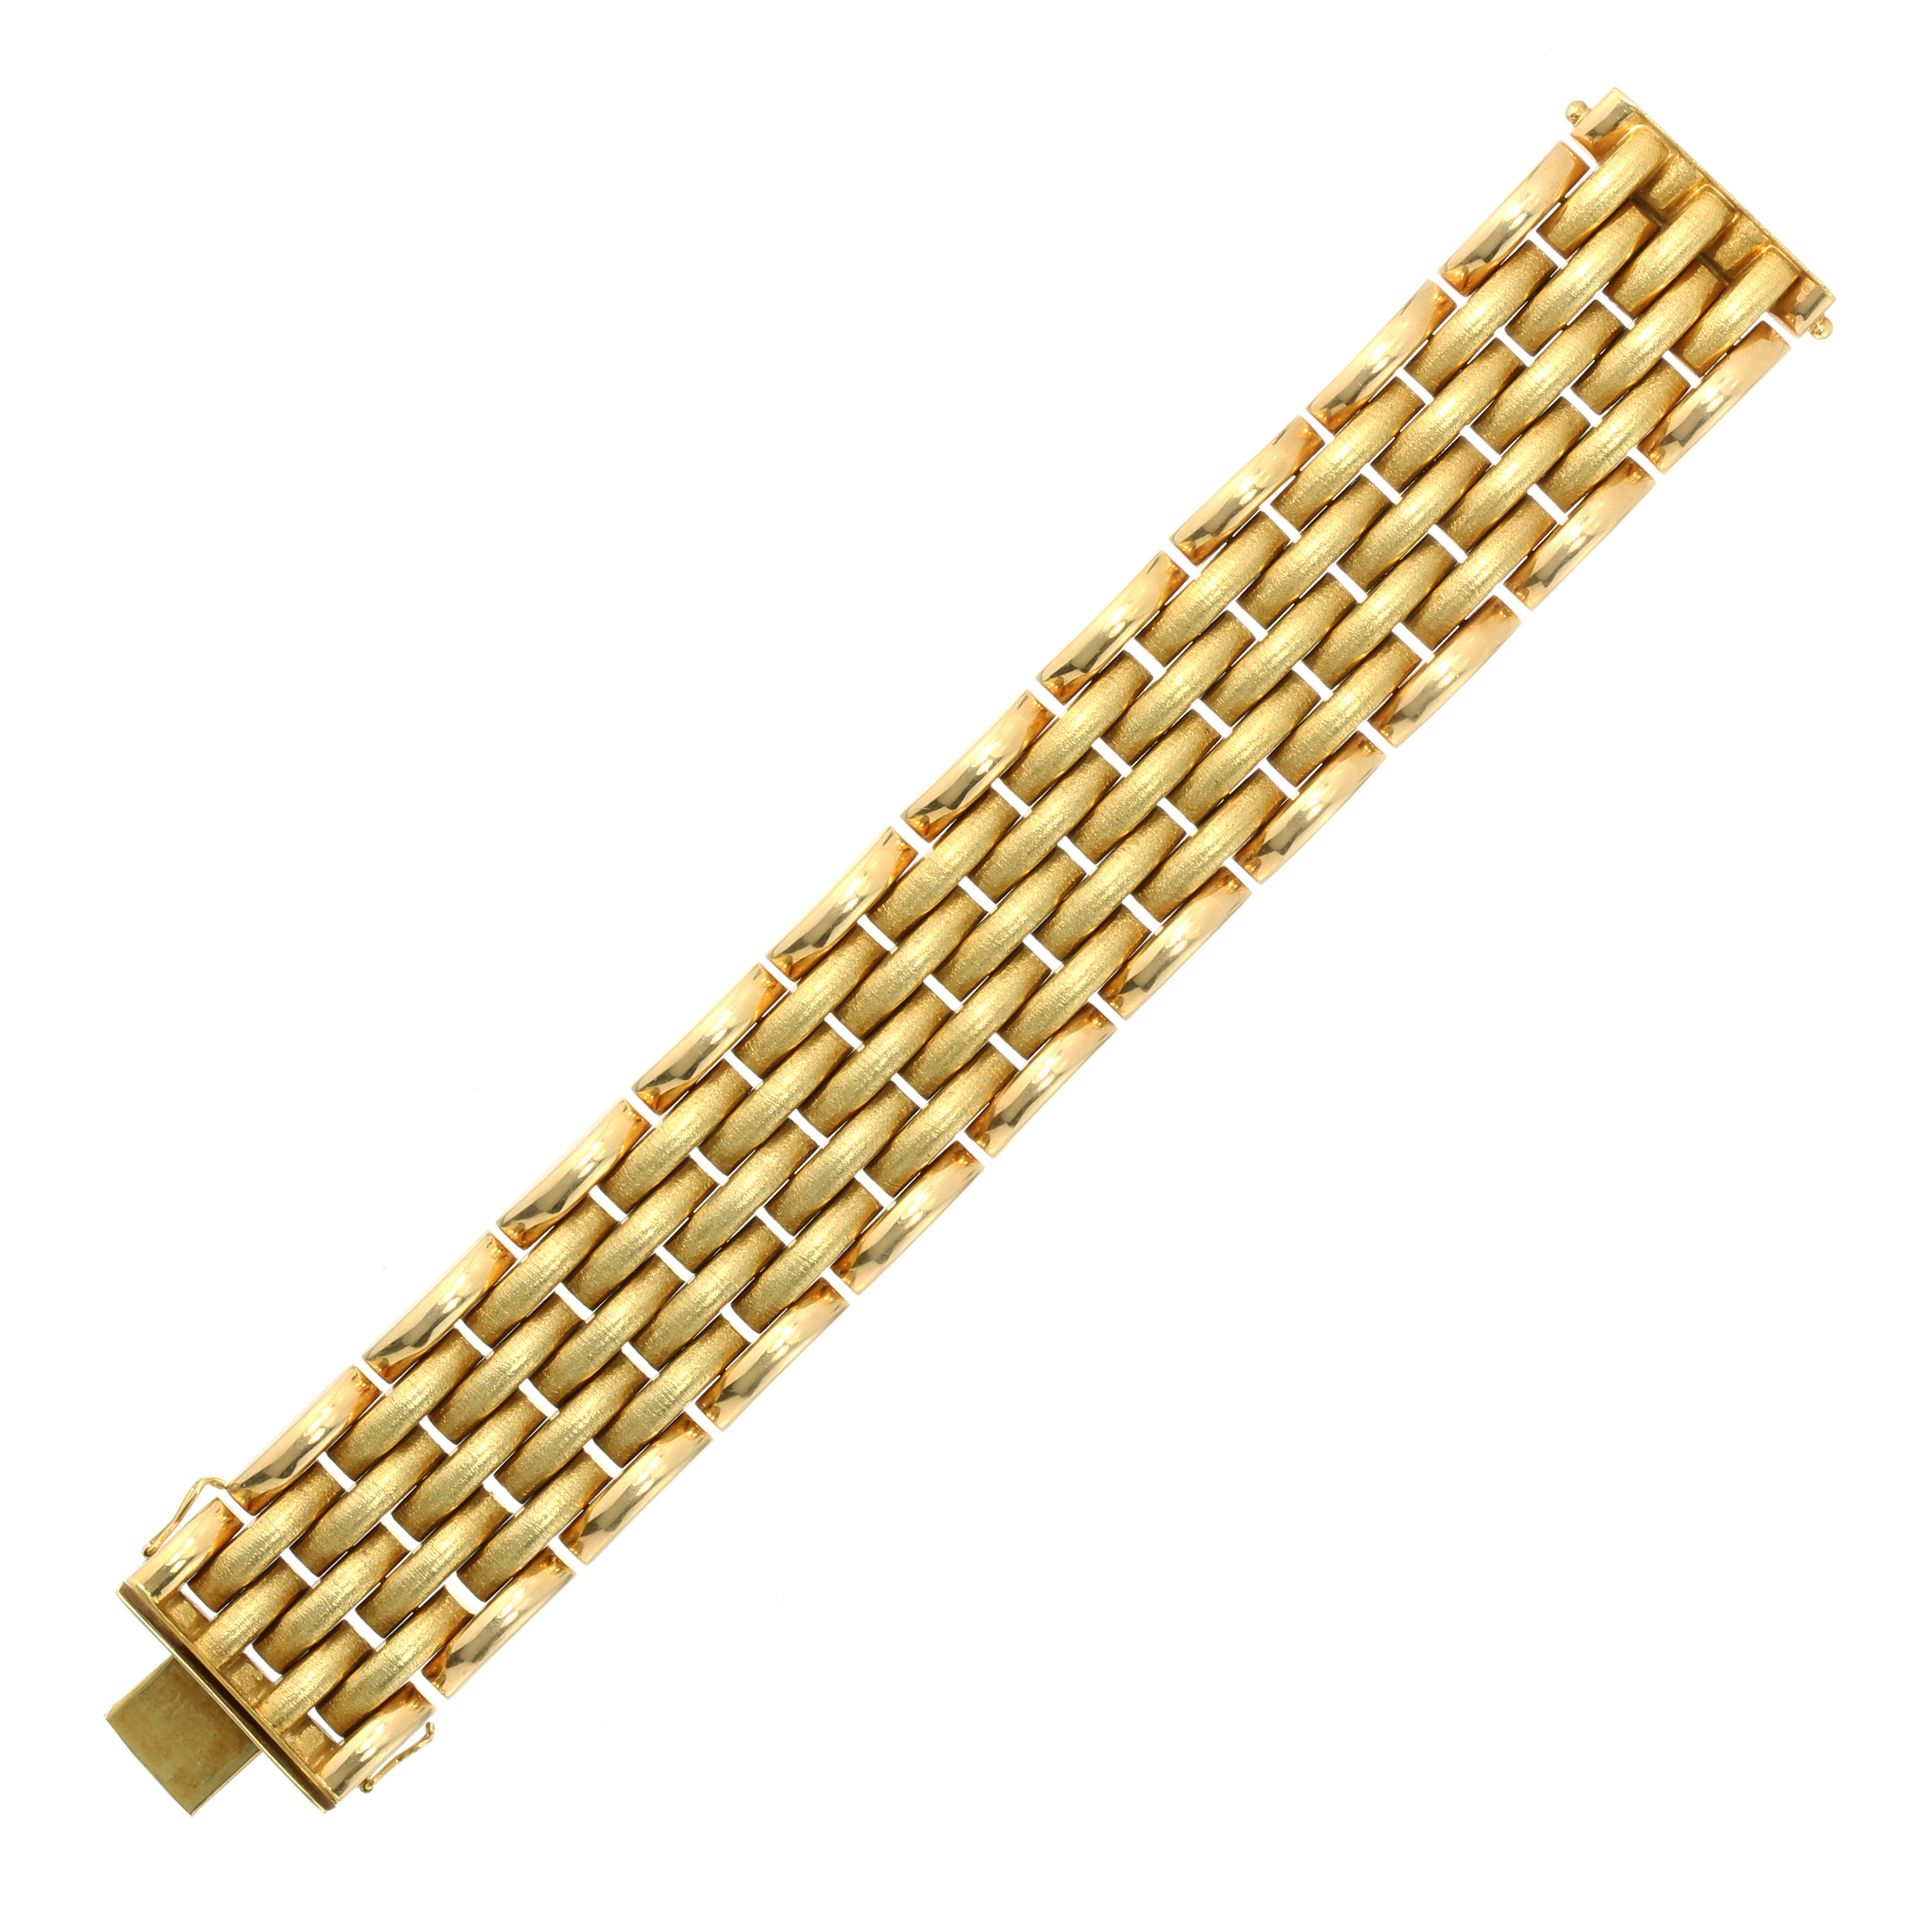 A FANCY LINK BRACELET designed as five rows of rounded matte textured links bordered by two